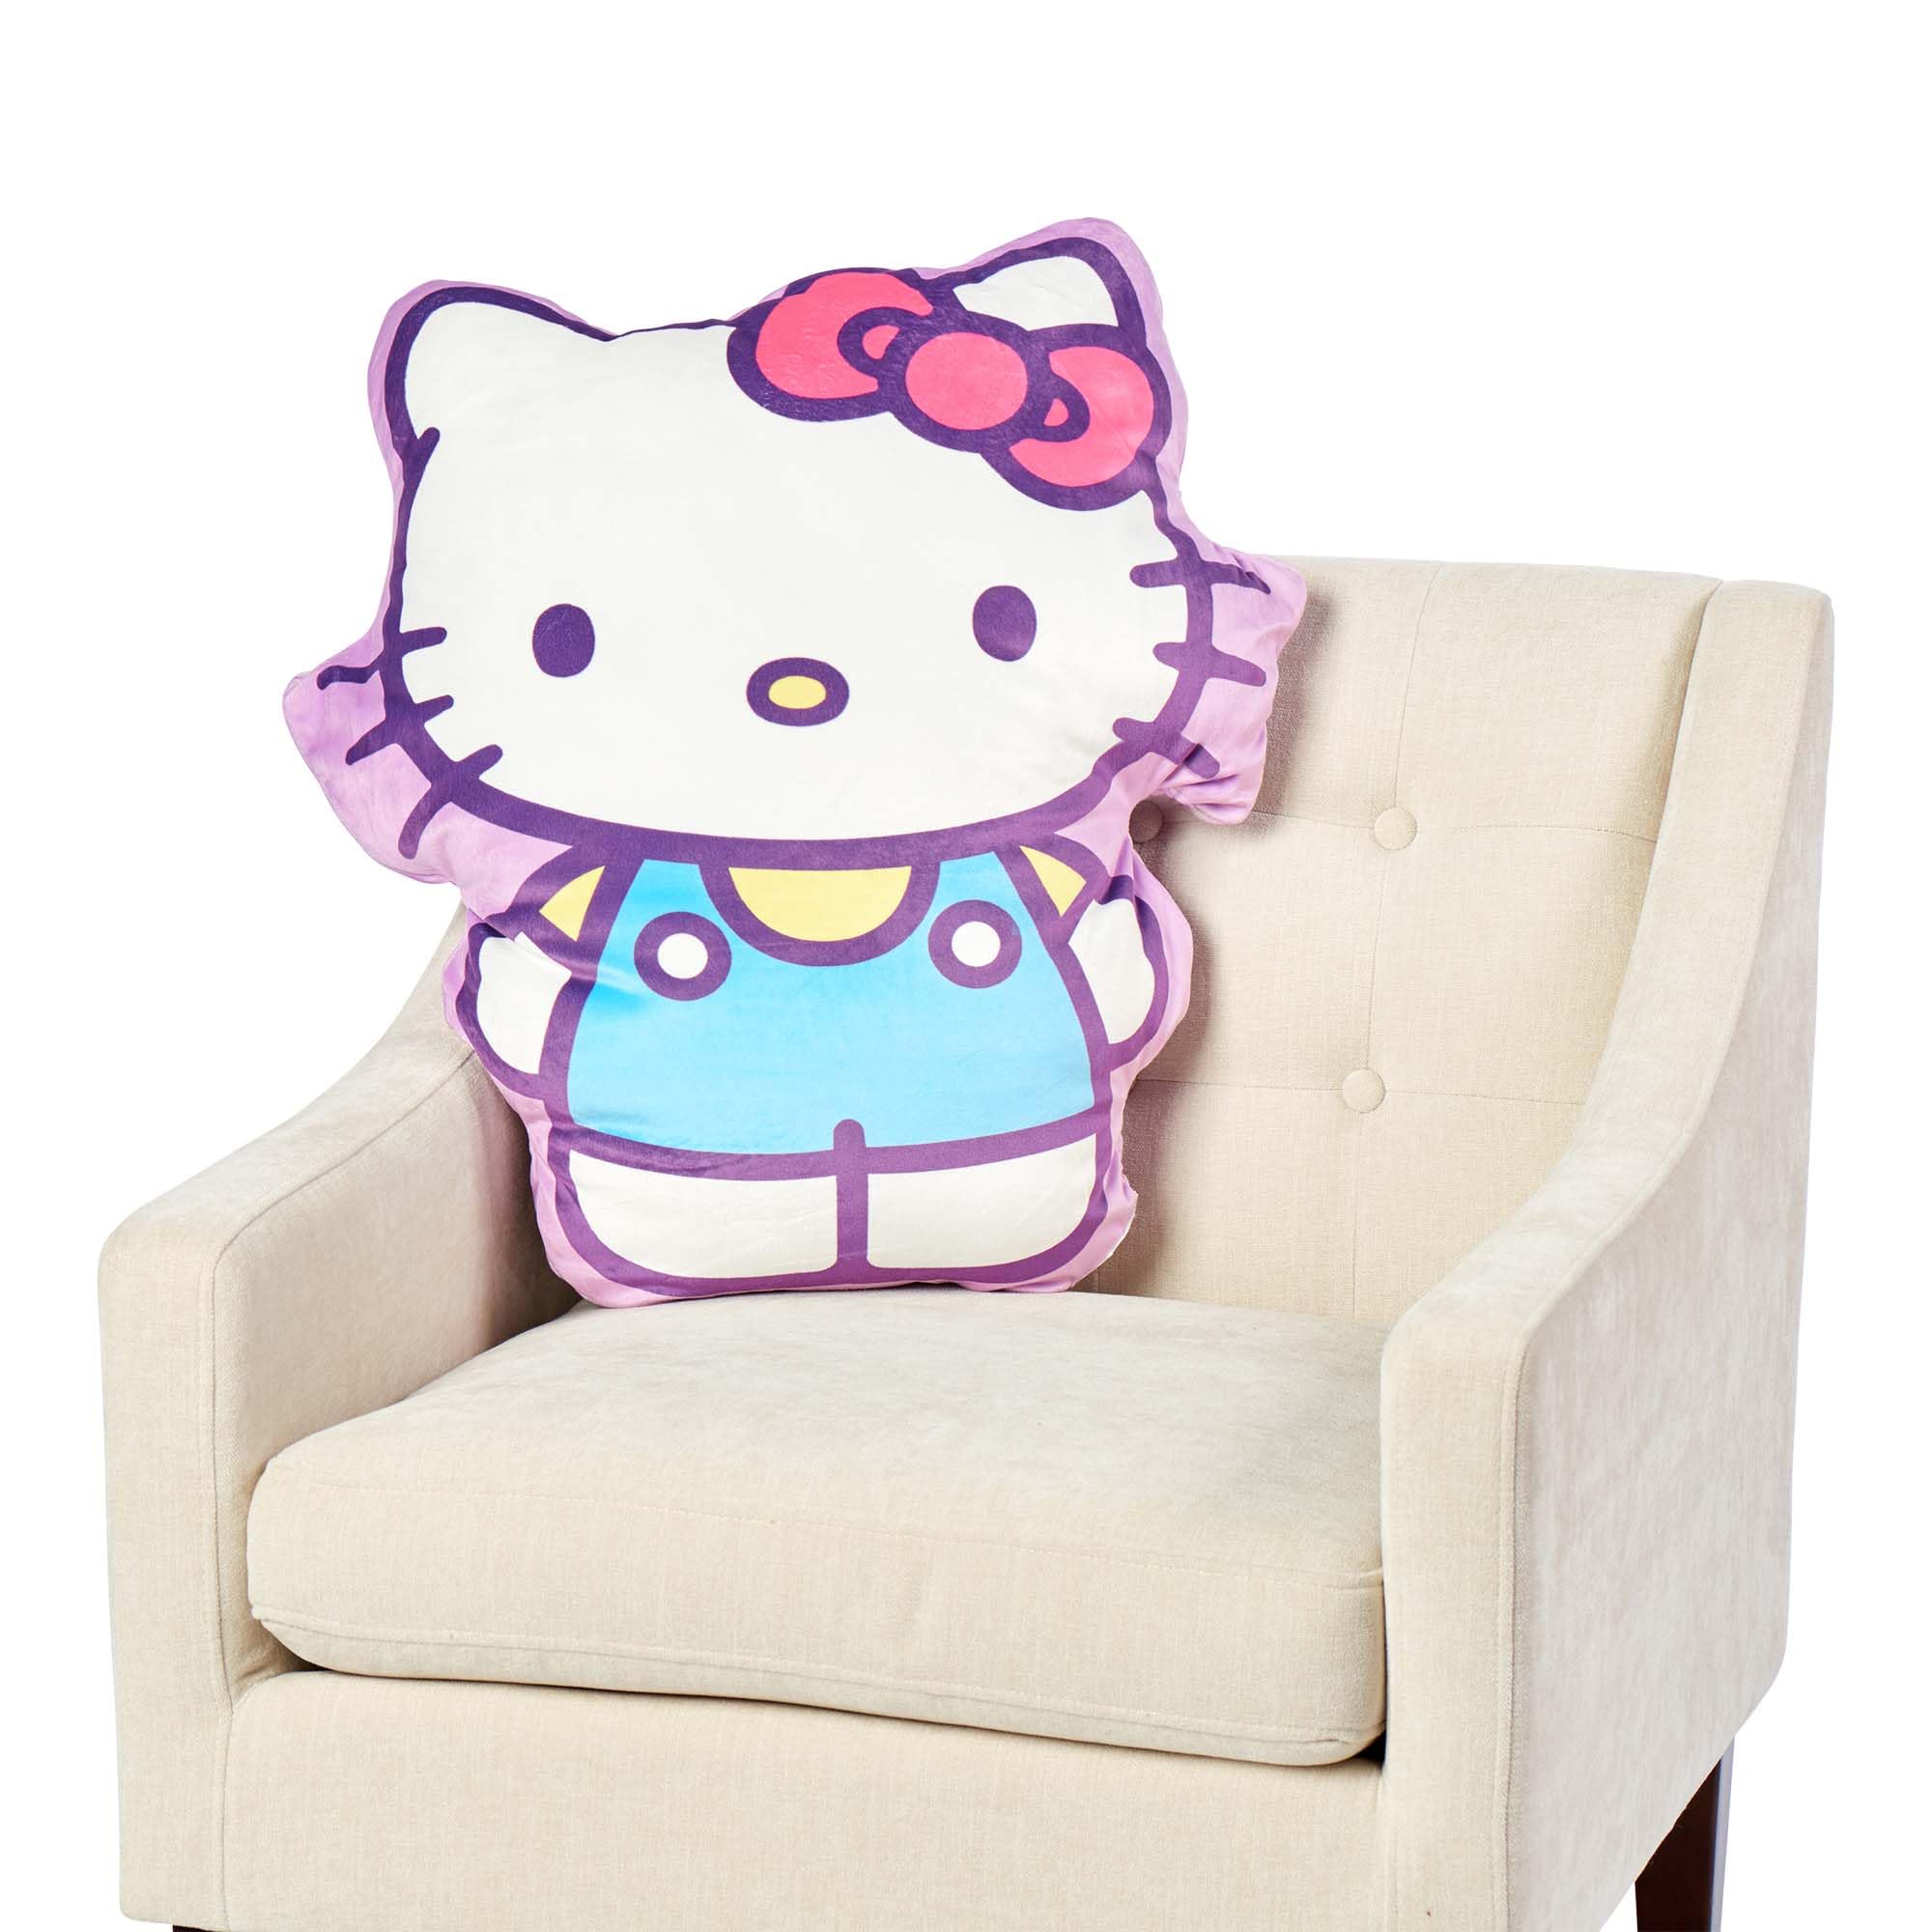 Northwest Hello Kitty Cloud Pal Character Pillow, 23